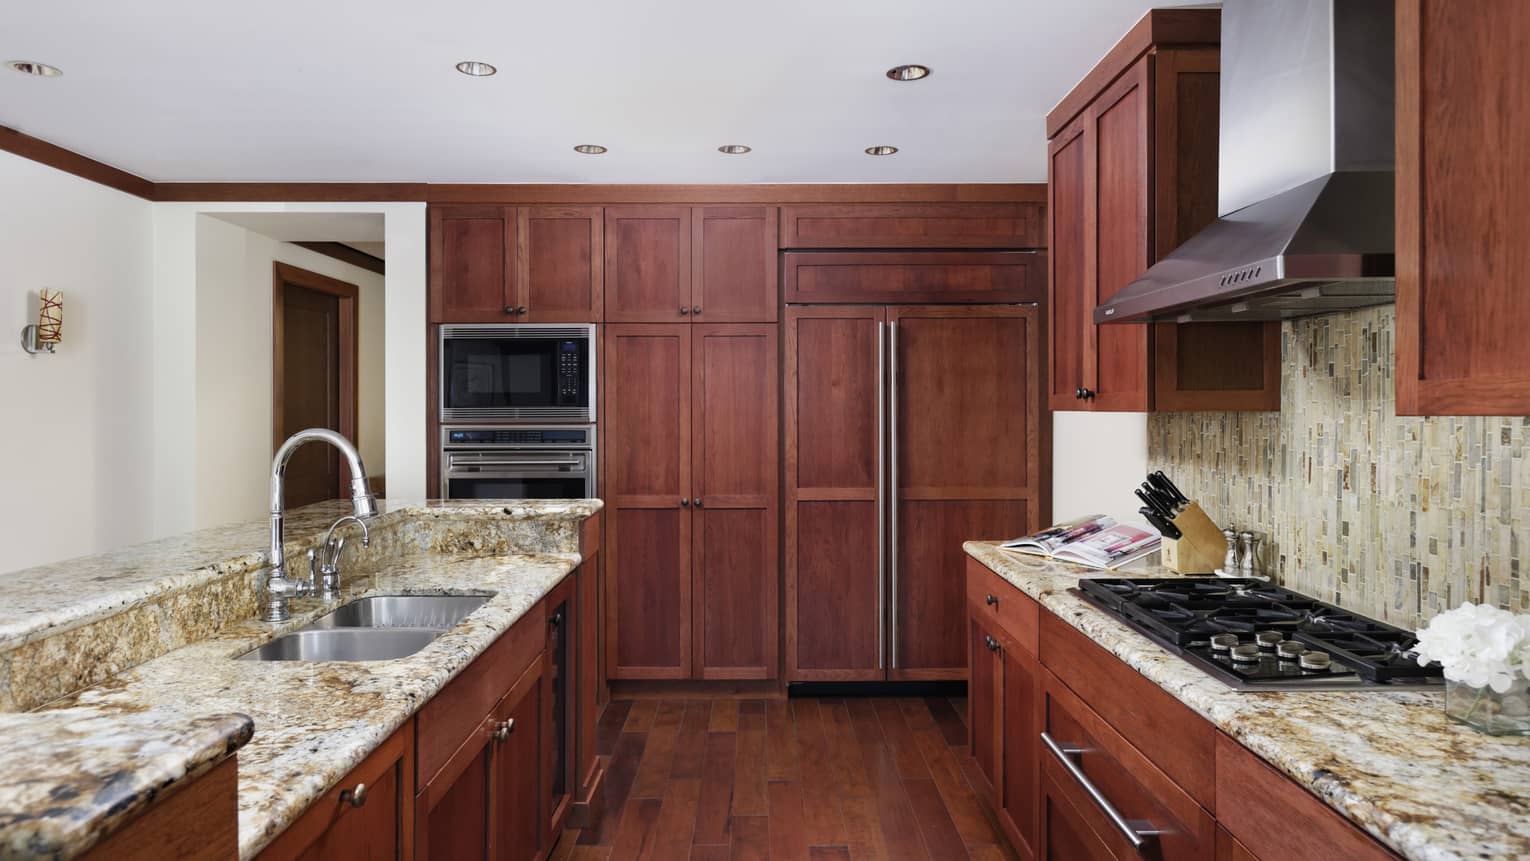 Kitchen with rich wood cabinets, natural-colored granite counters